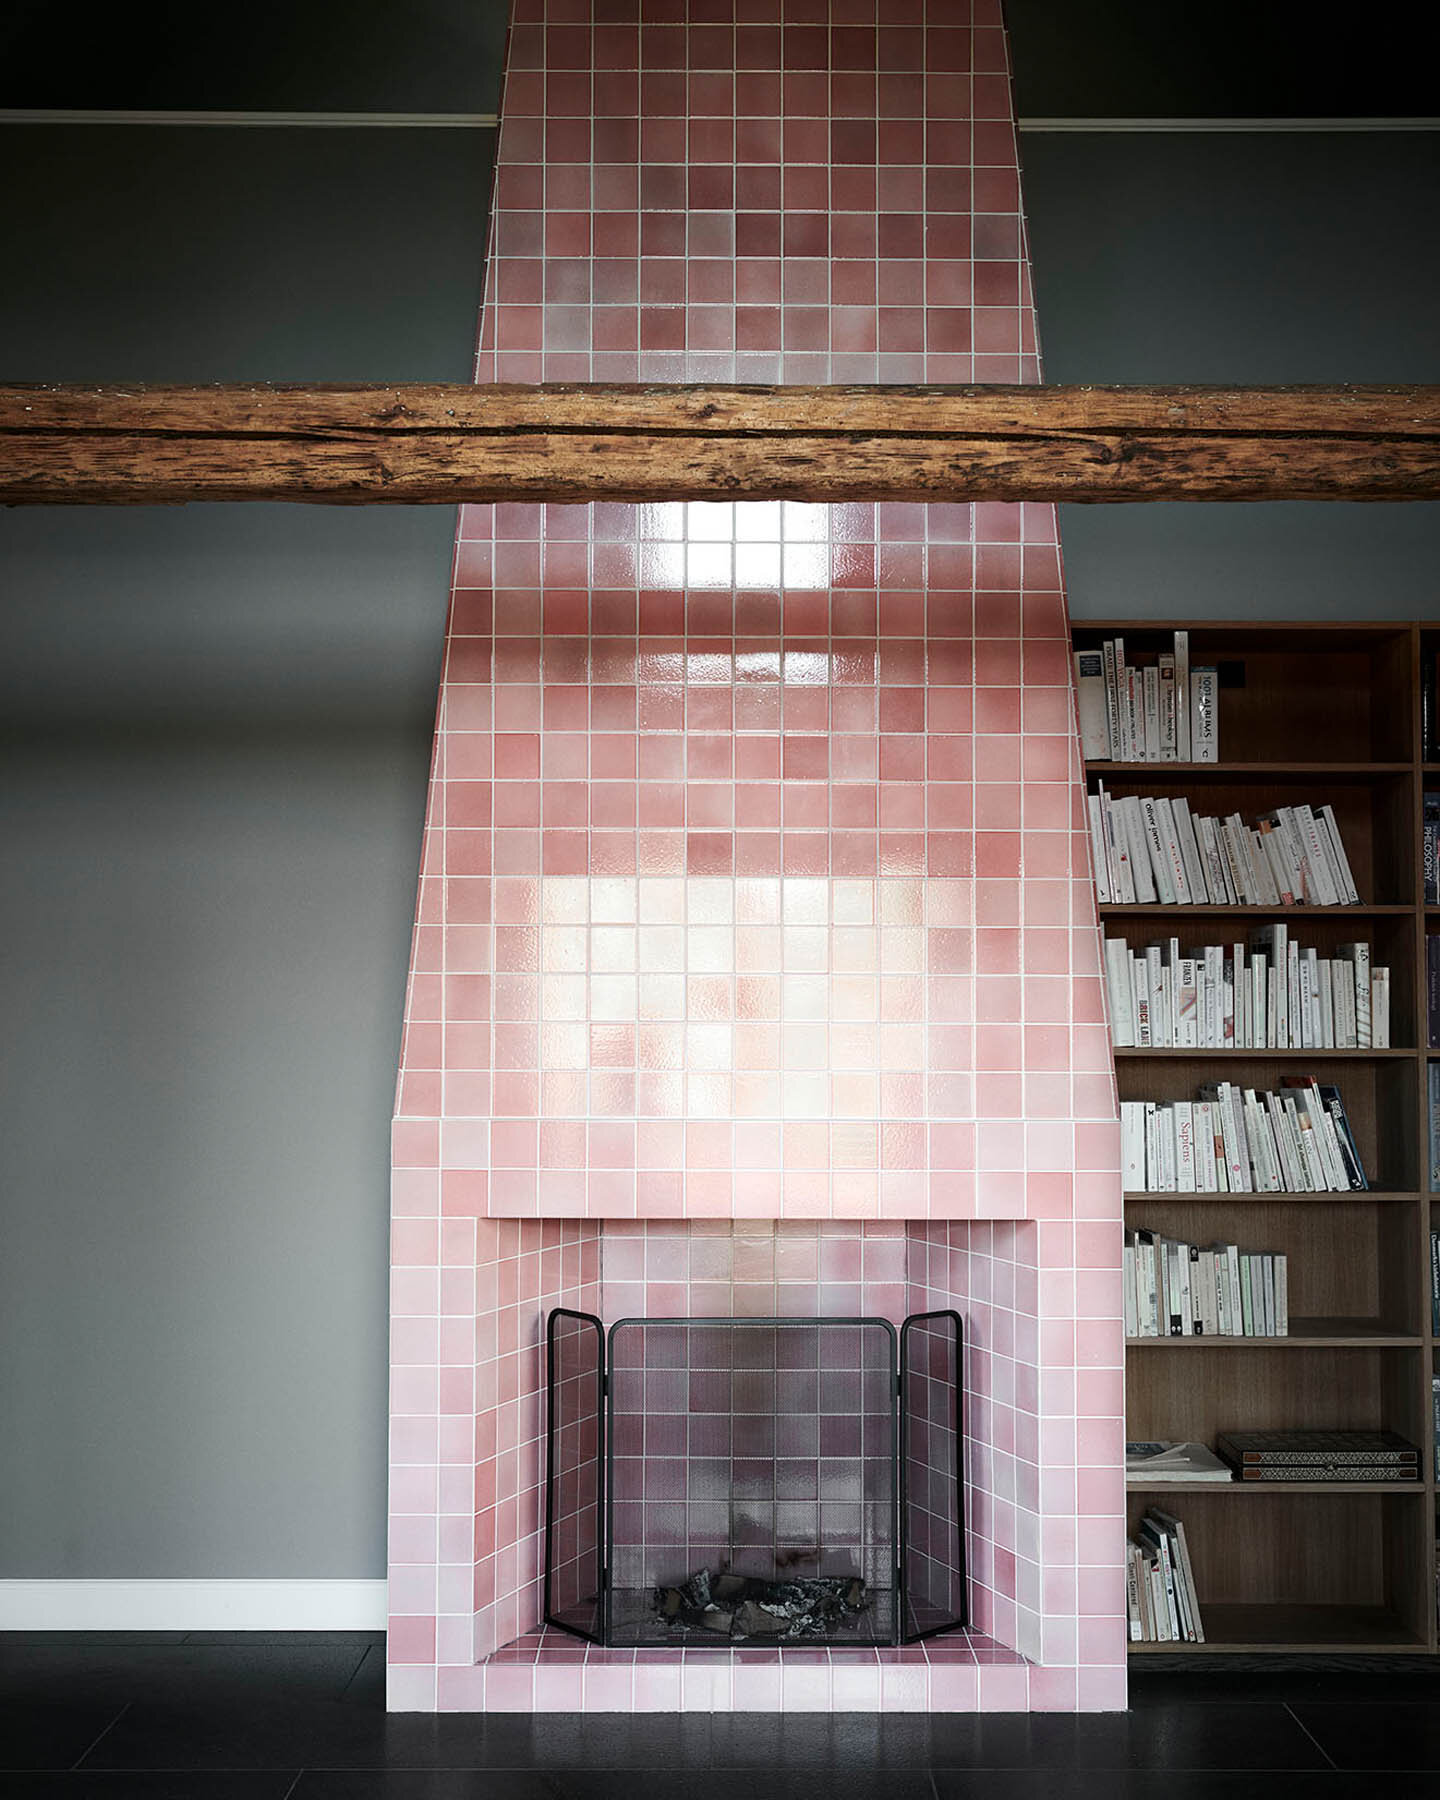 Chimney with clay tiles in format 10x10x1 cm glased with 'Coral Red Shiny Crystal' 